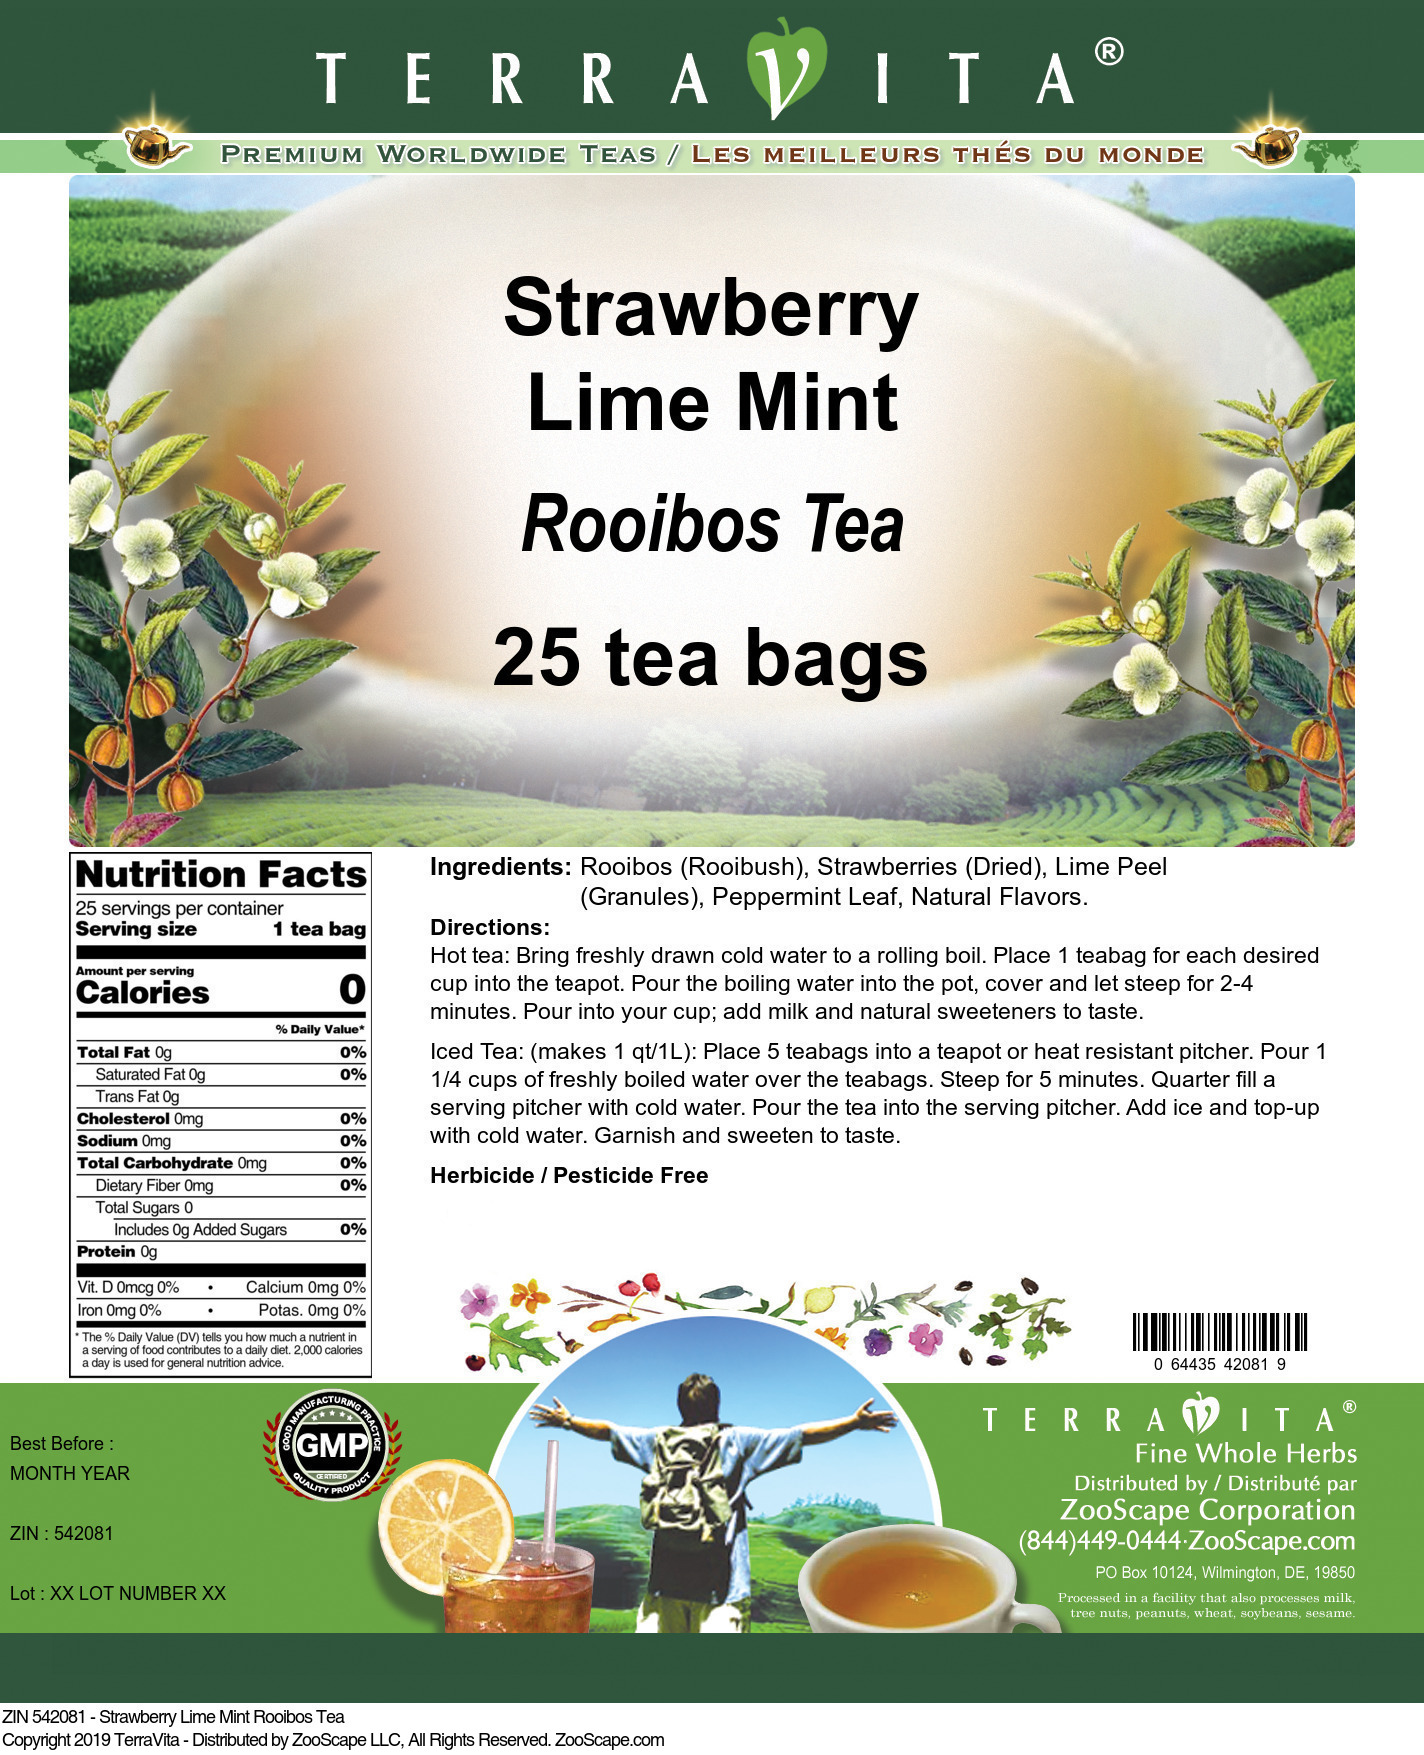 Strawberry Lime Mint Rooibos Tea - Label